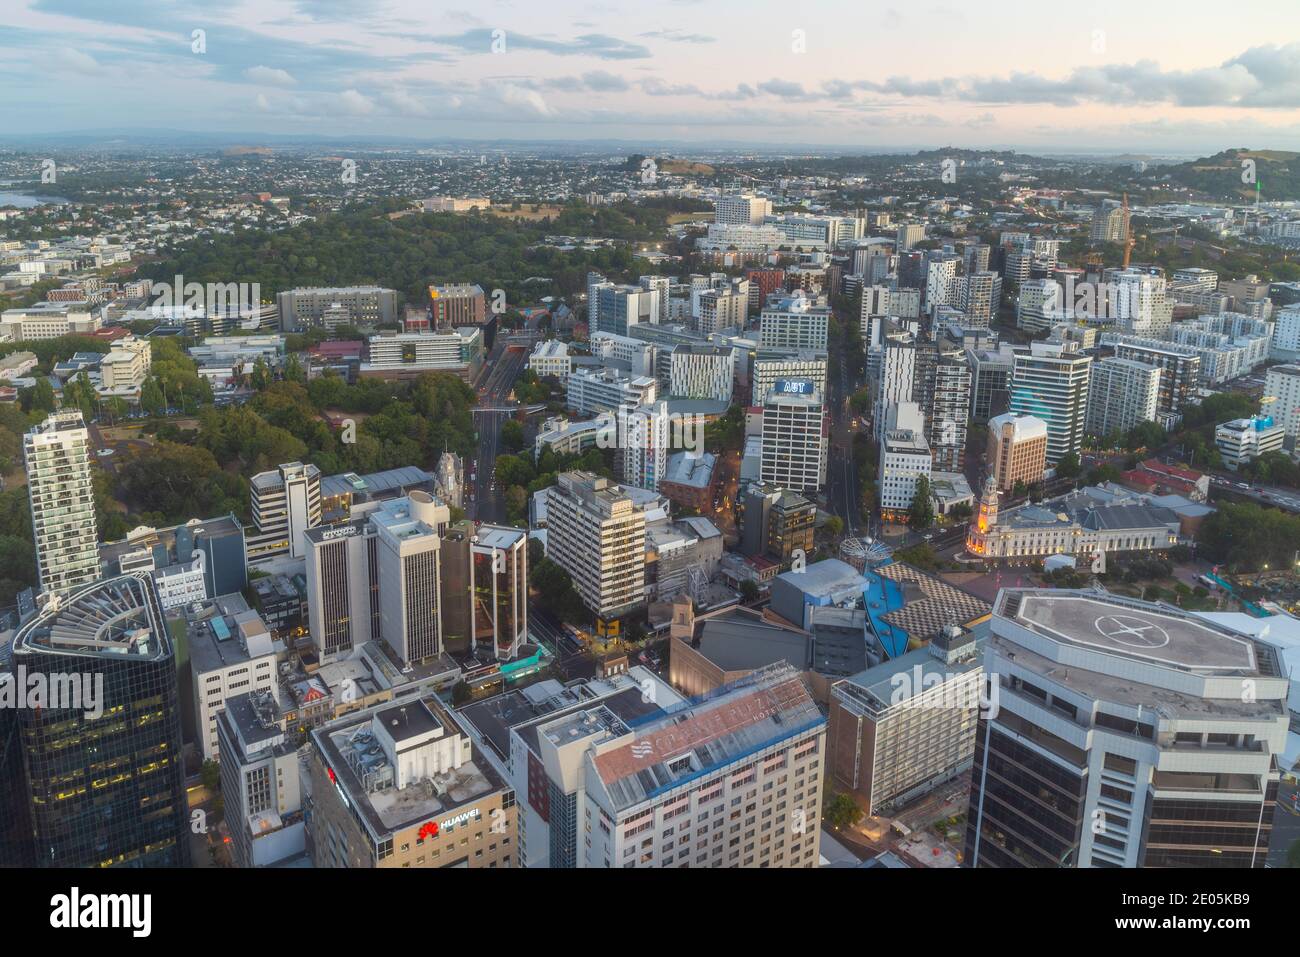 AUCKLAND, NEW ZEALAND, FEBRUARY 19, 2020: Night aerial view of center of Auckland from Sky tower, New Zealand Stock Photo